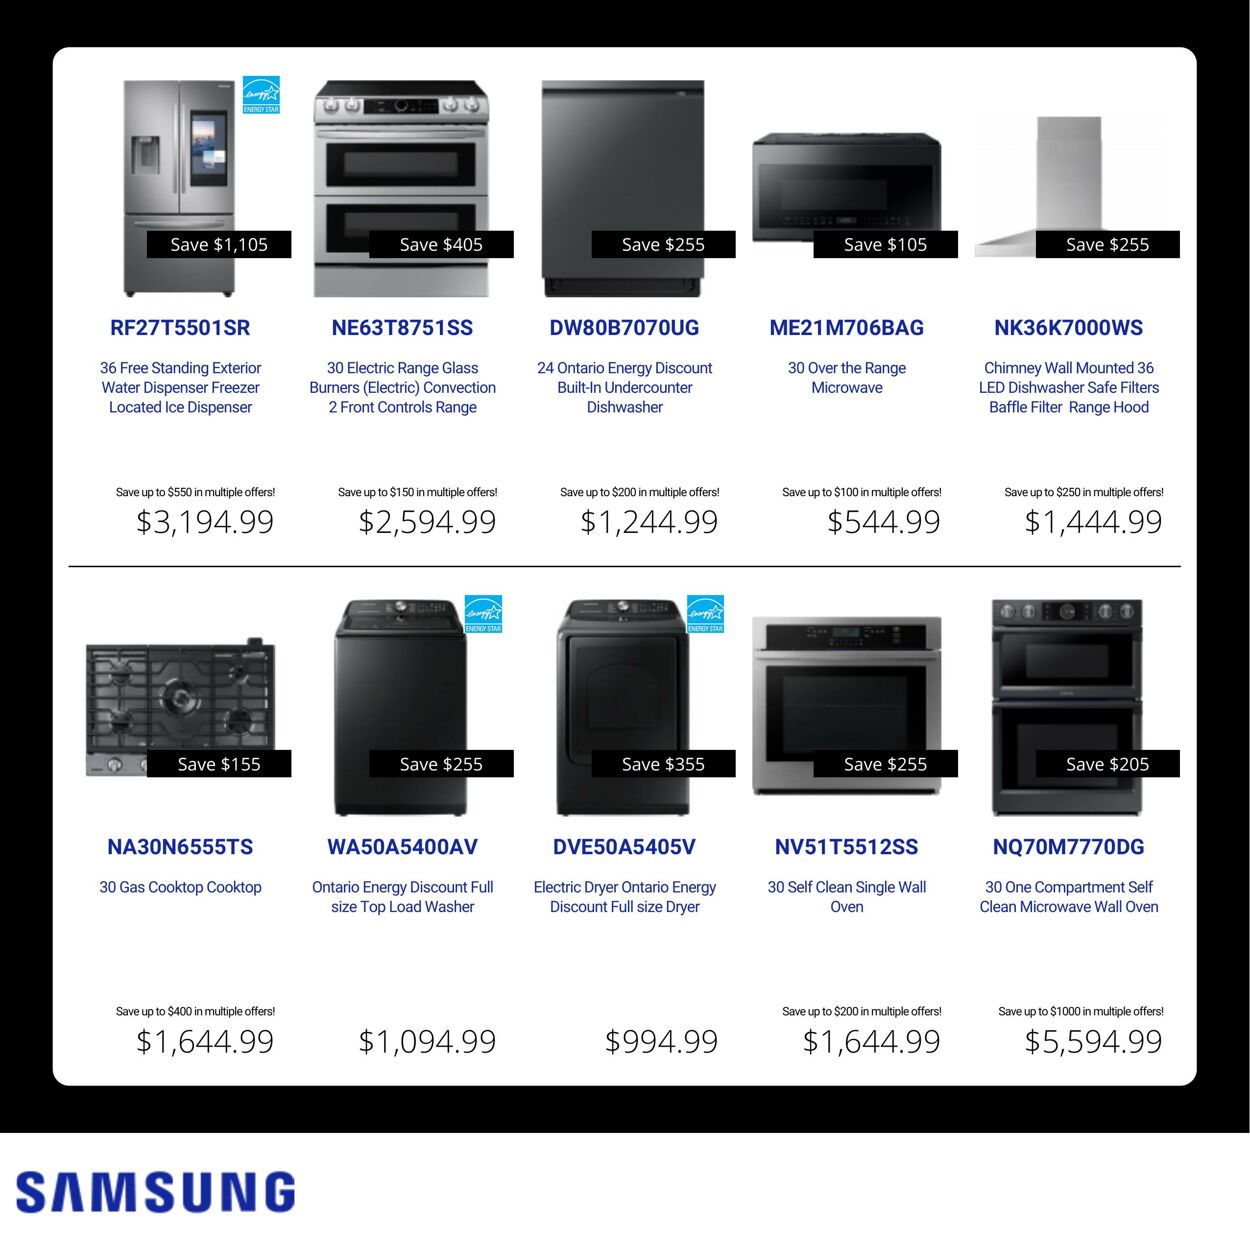 Flyer Canadian Appliance Source 10.11.2022 - 16.11.2022